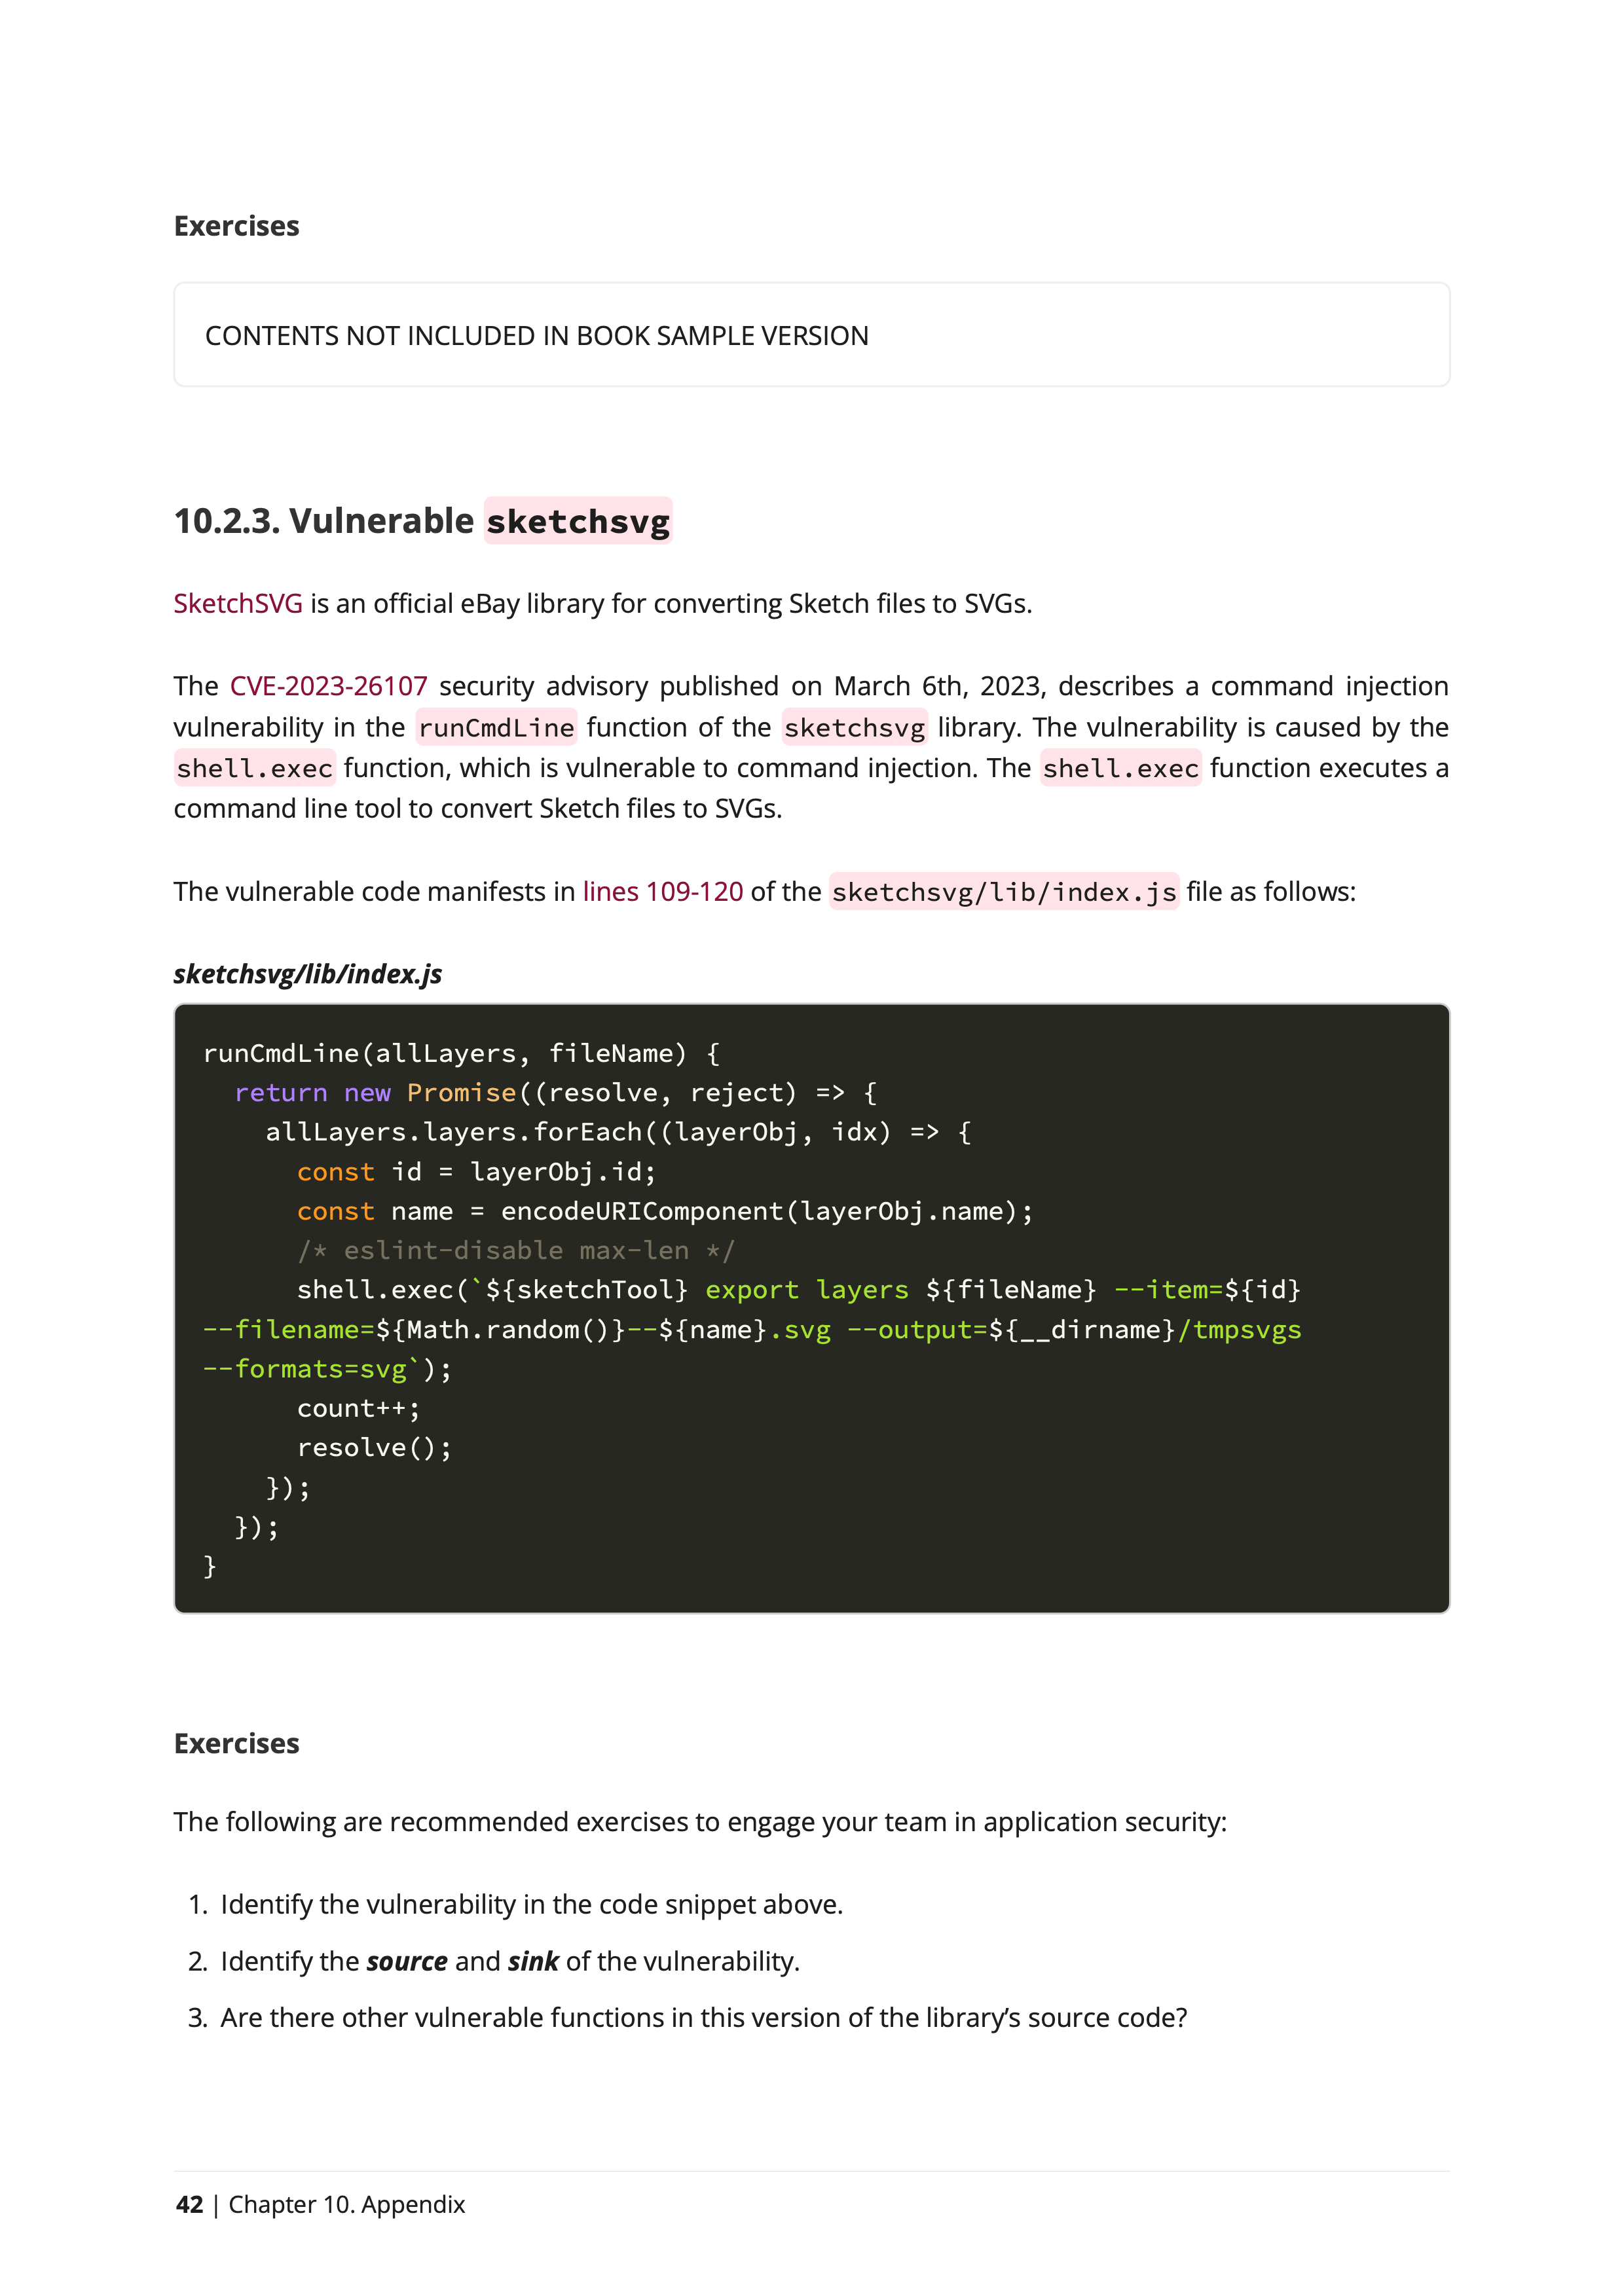 The vulnerable sketchsvg npm package reviewed in the Command Injection book